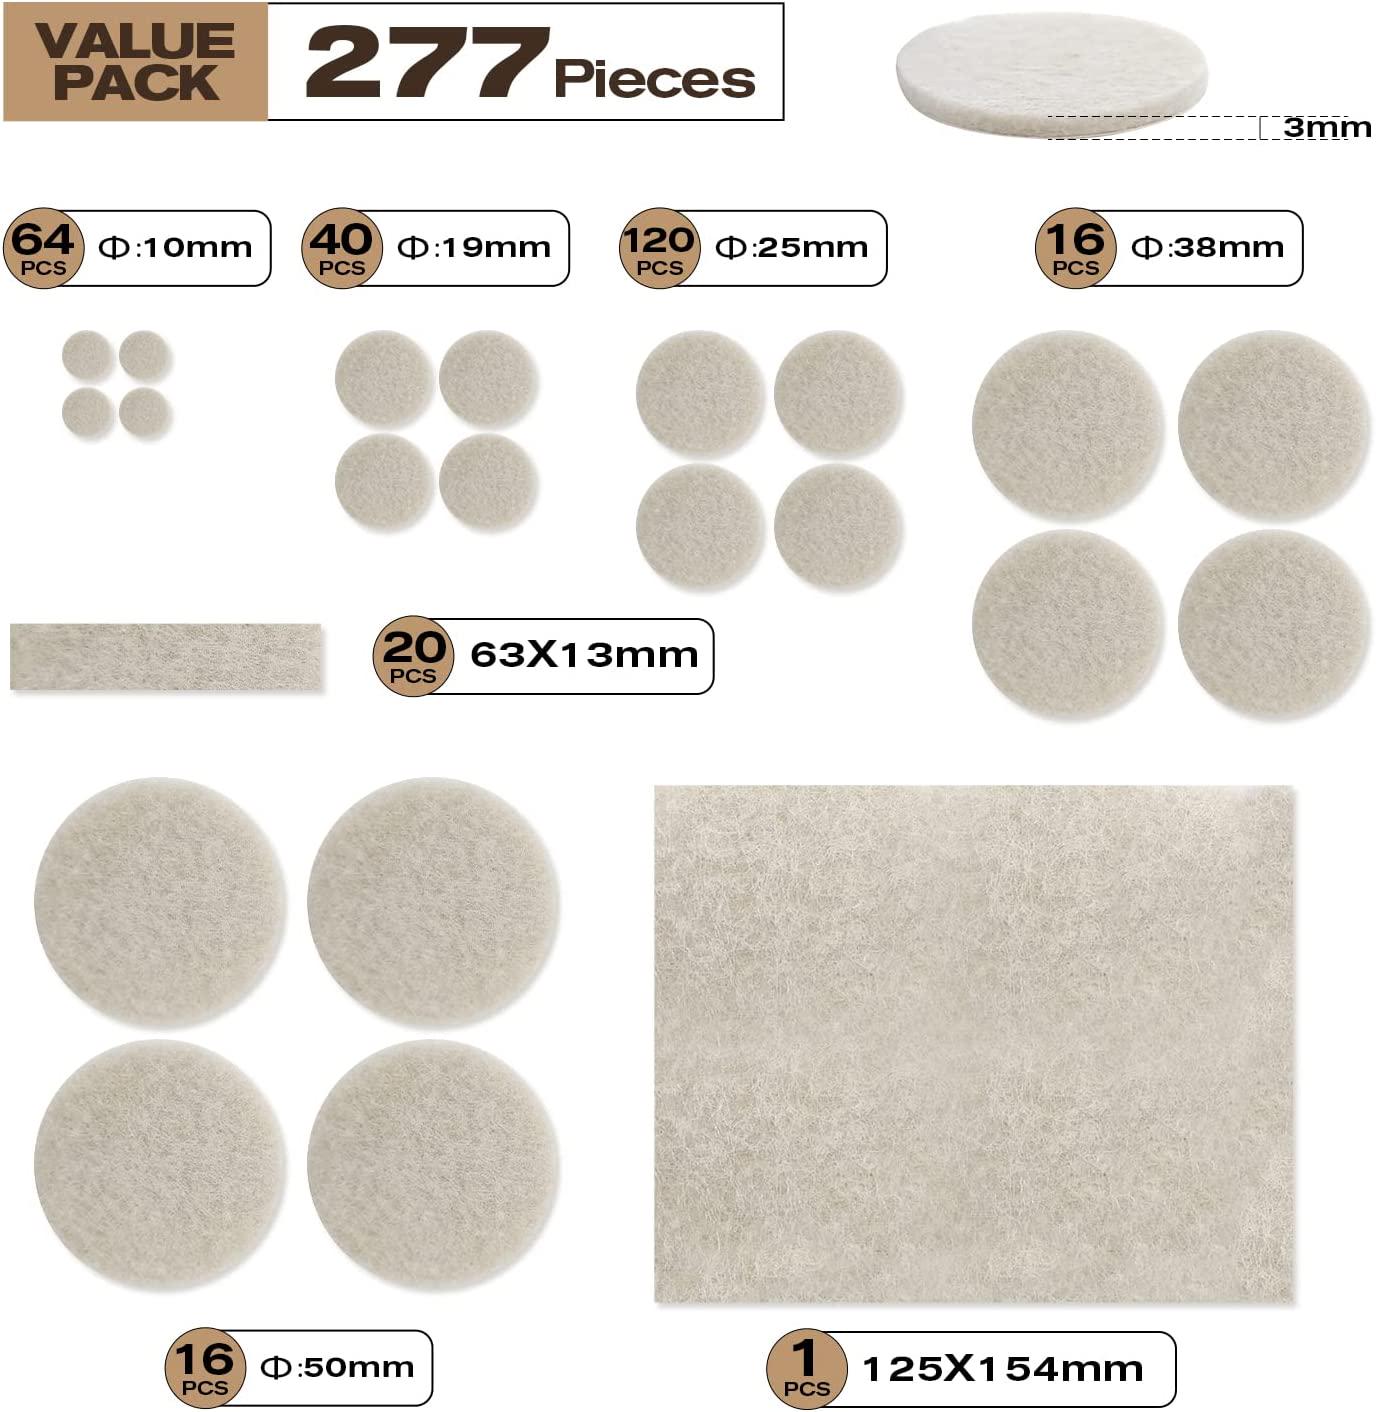 Croch, Felt Furniture Pads 277PCS Assorted Sizes Value Pack Premium Self Adhesive Anti Scratch Floors Protectors for Hardwood and Laminate Flooring